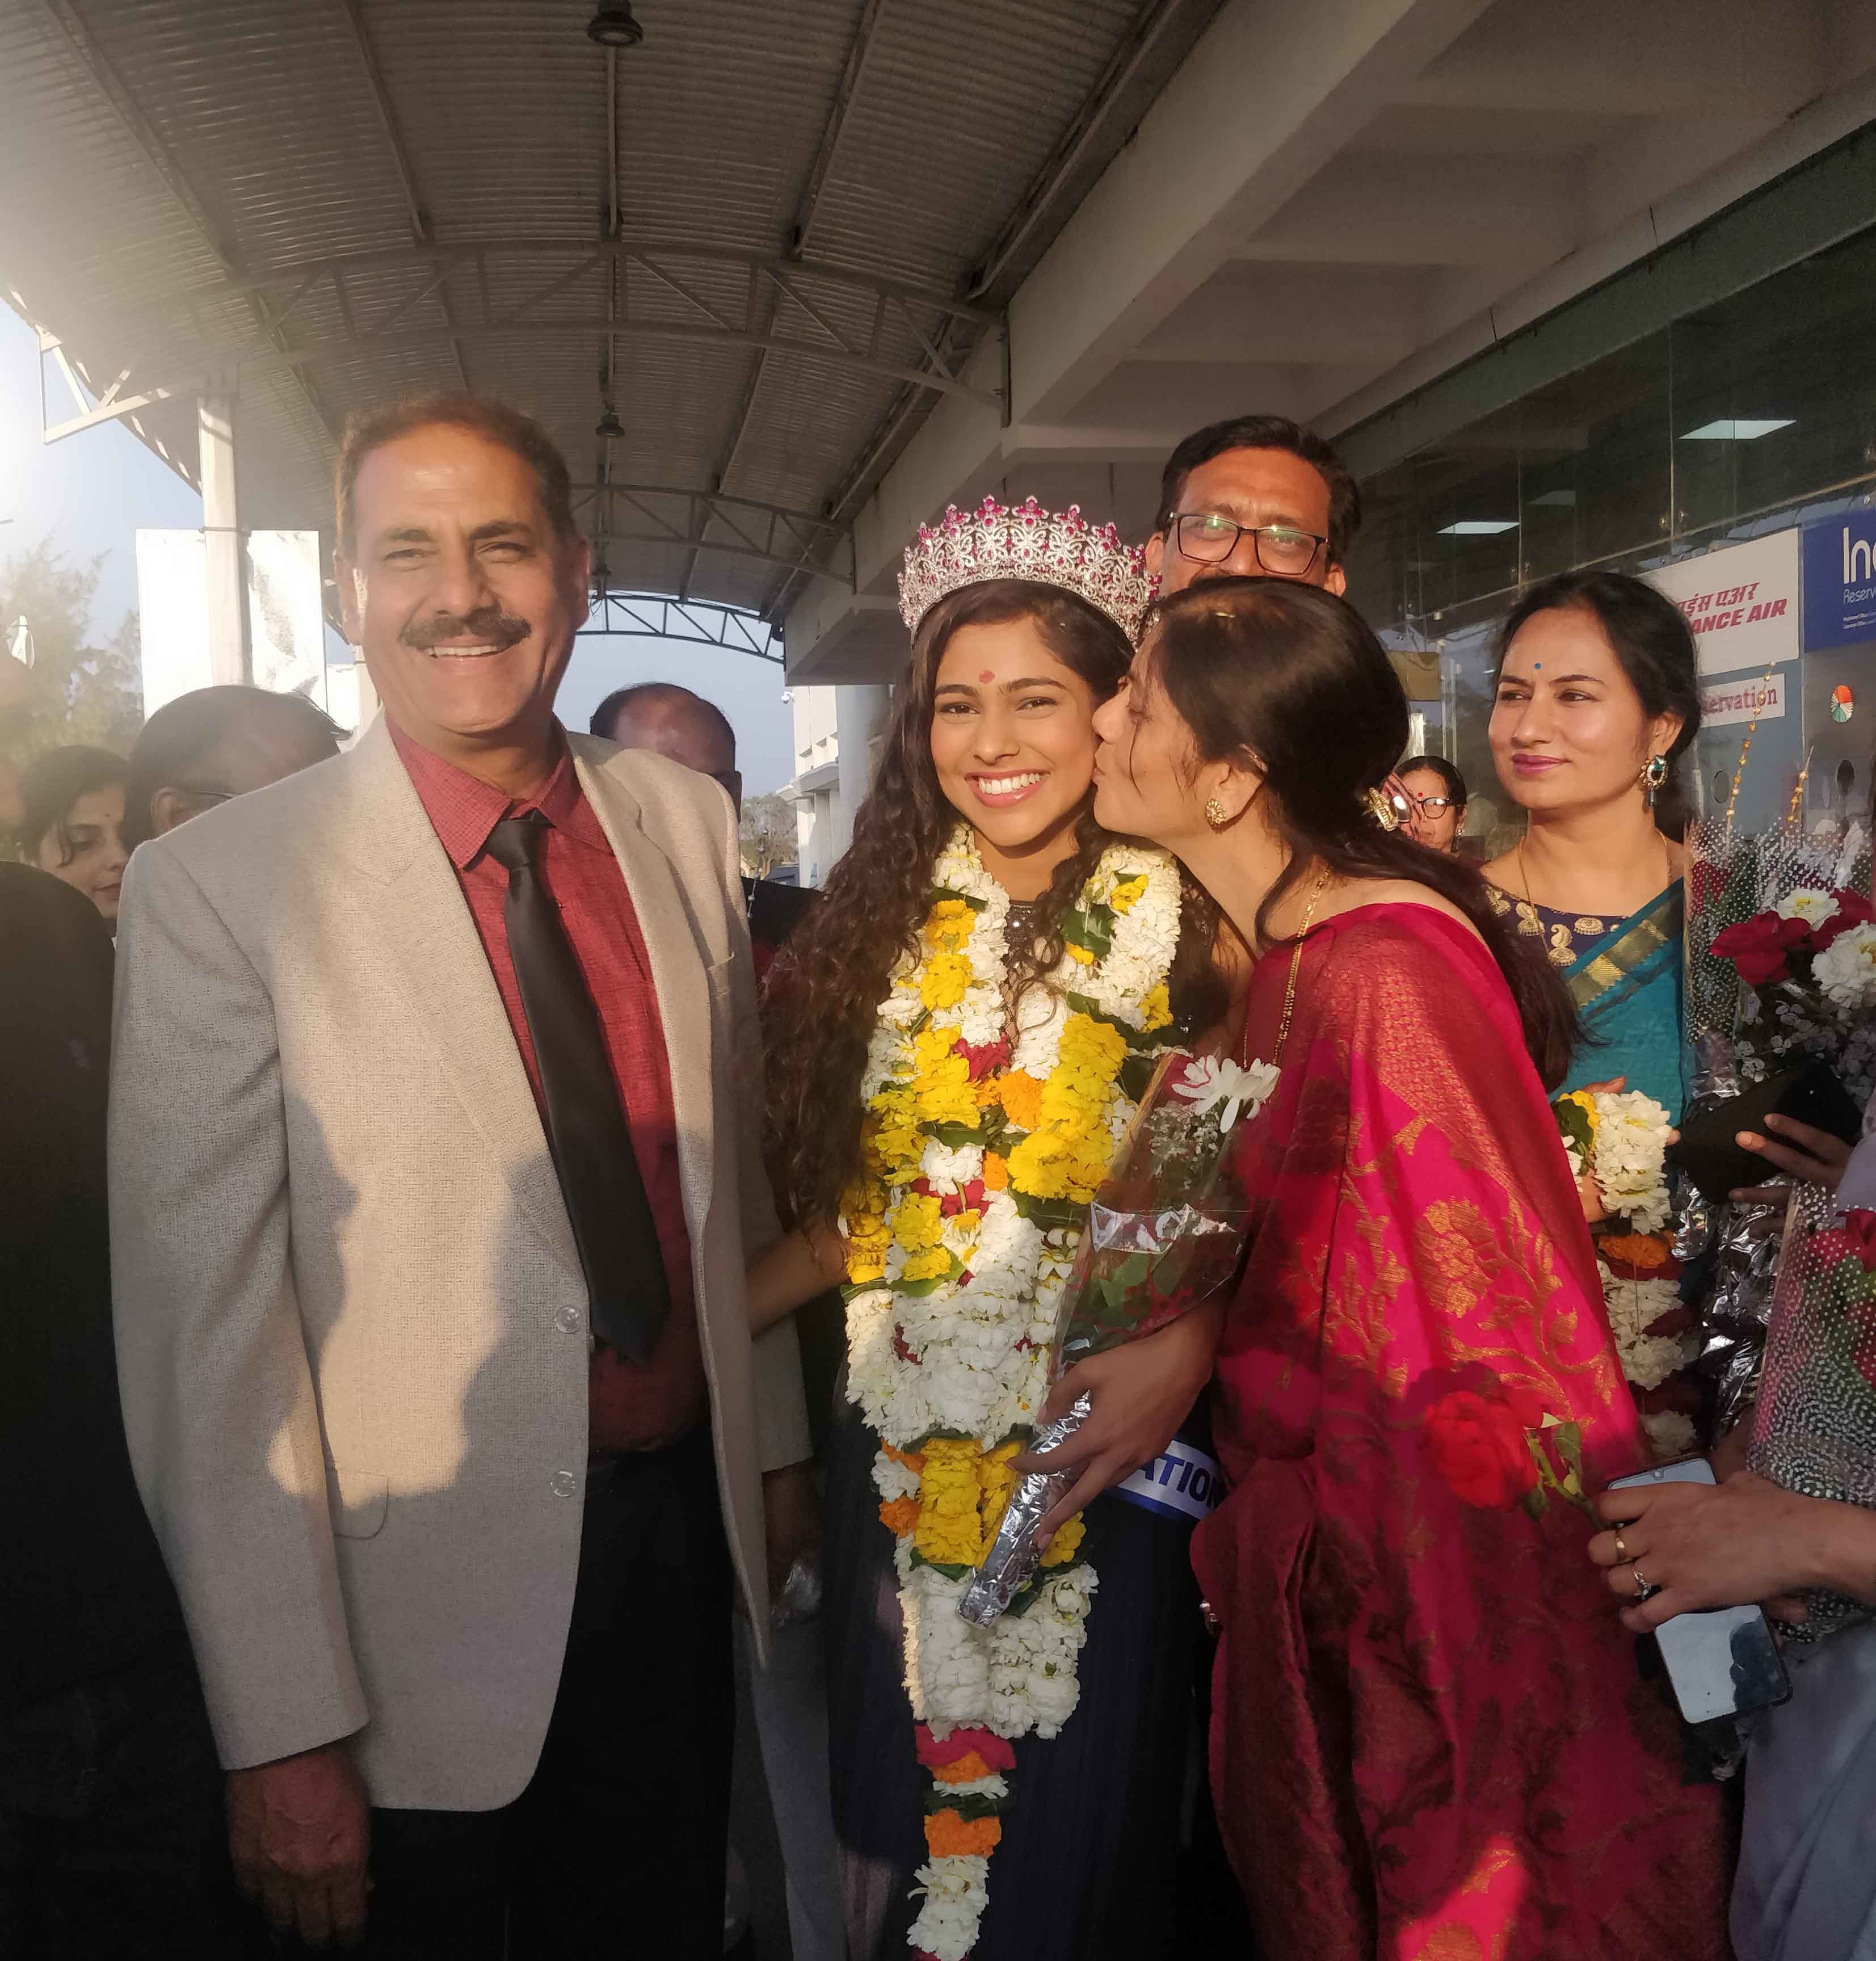 Airport welcome at Jabalpur. Father Rajesh Choudhary was proud of her while mother Rita plants a peck on her cheek with love